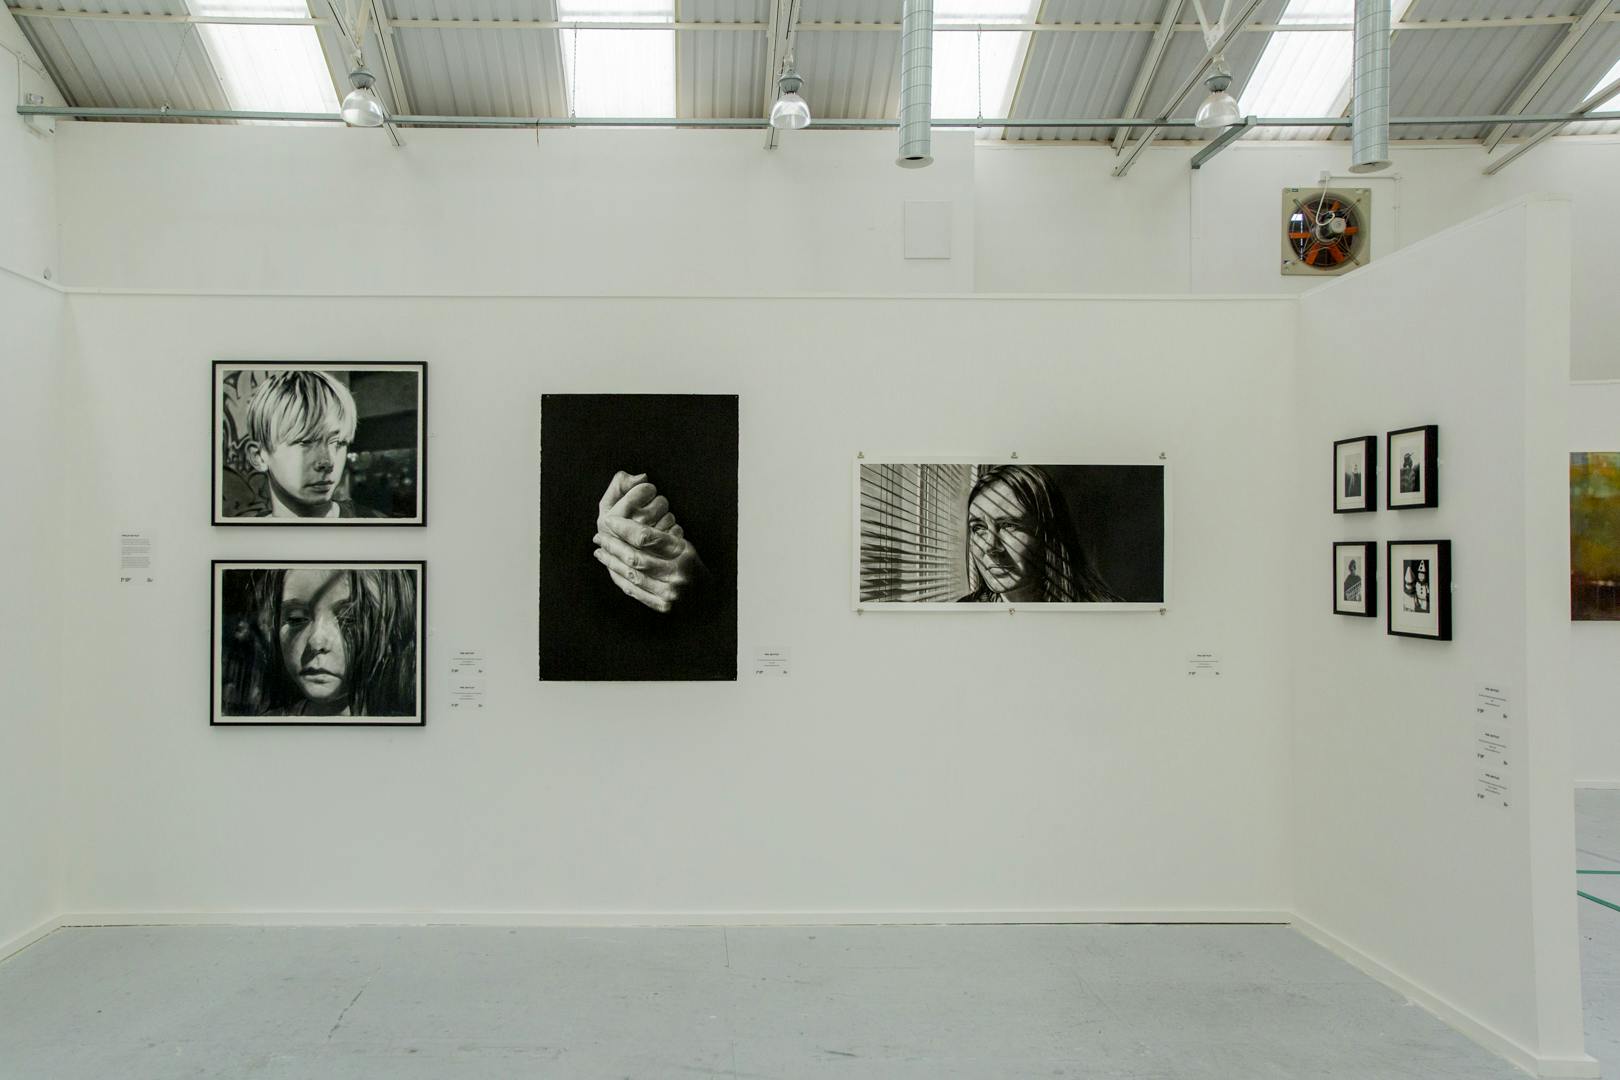 Image shows Phillip's hand drawn grey scale work in an exhibition setting featuring the drawings in black frames on a neutral white background